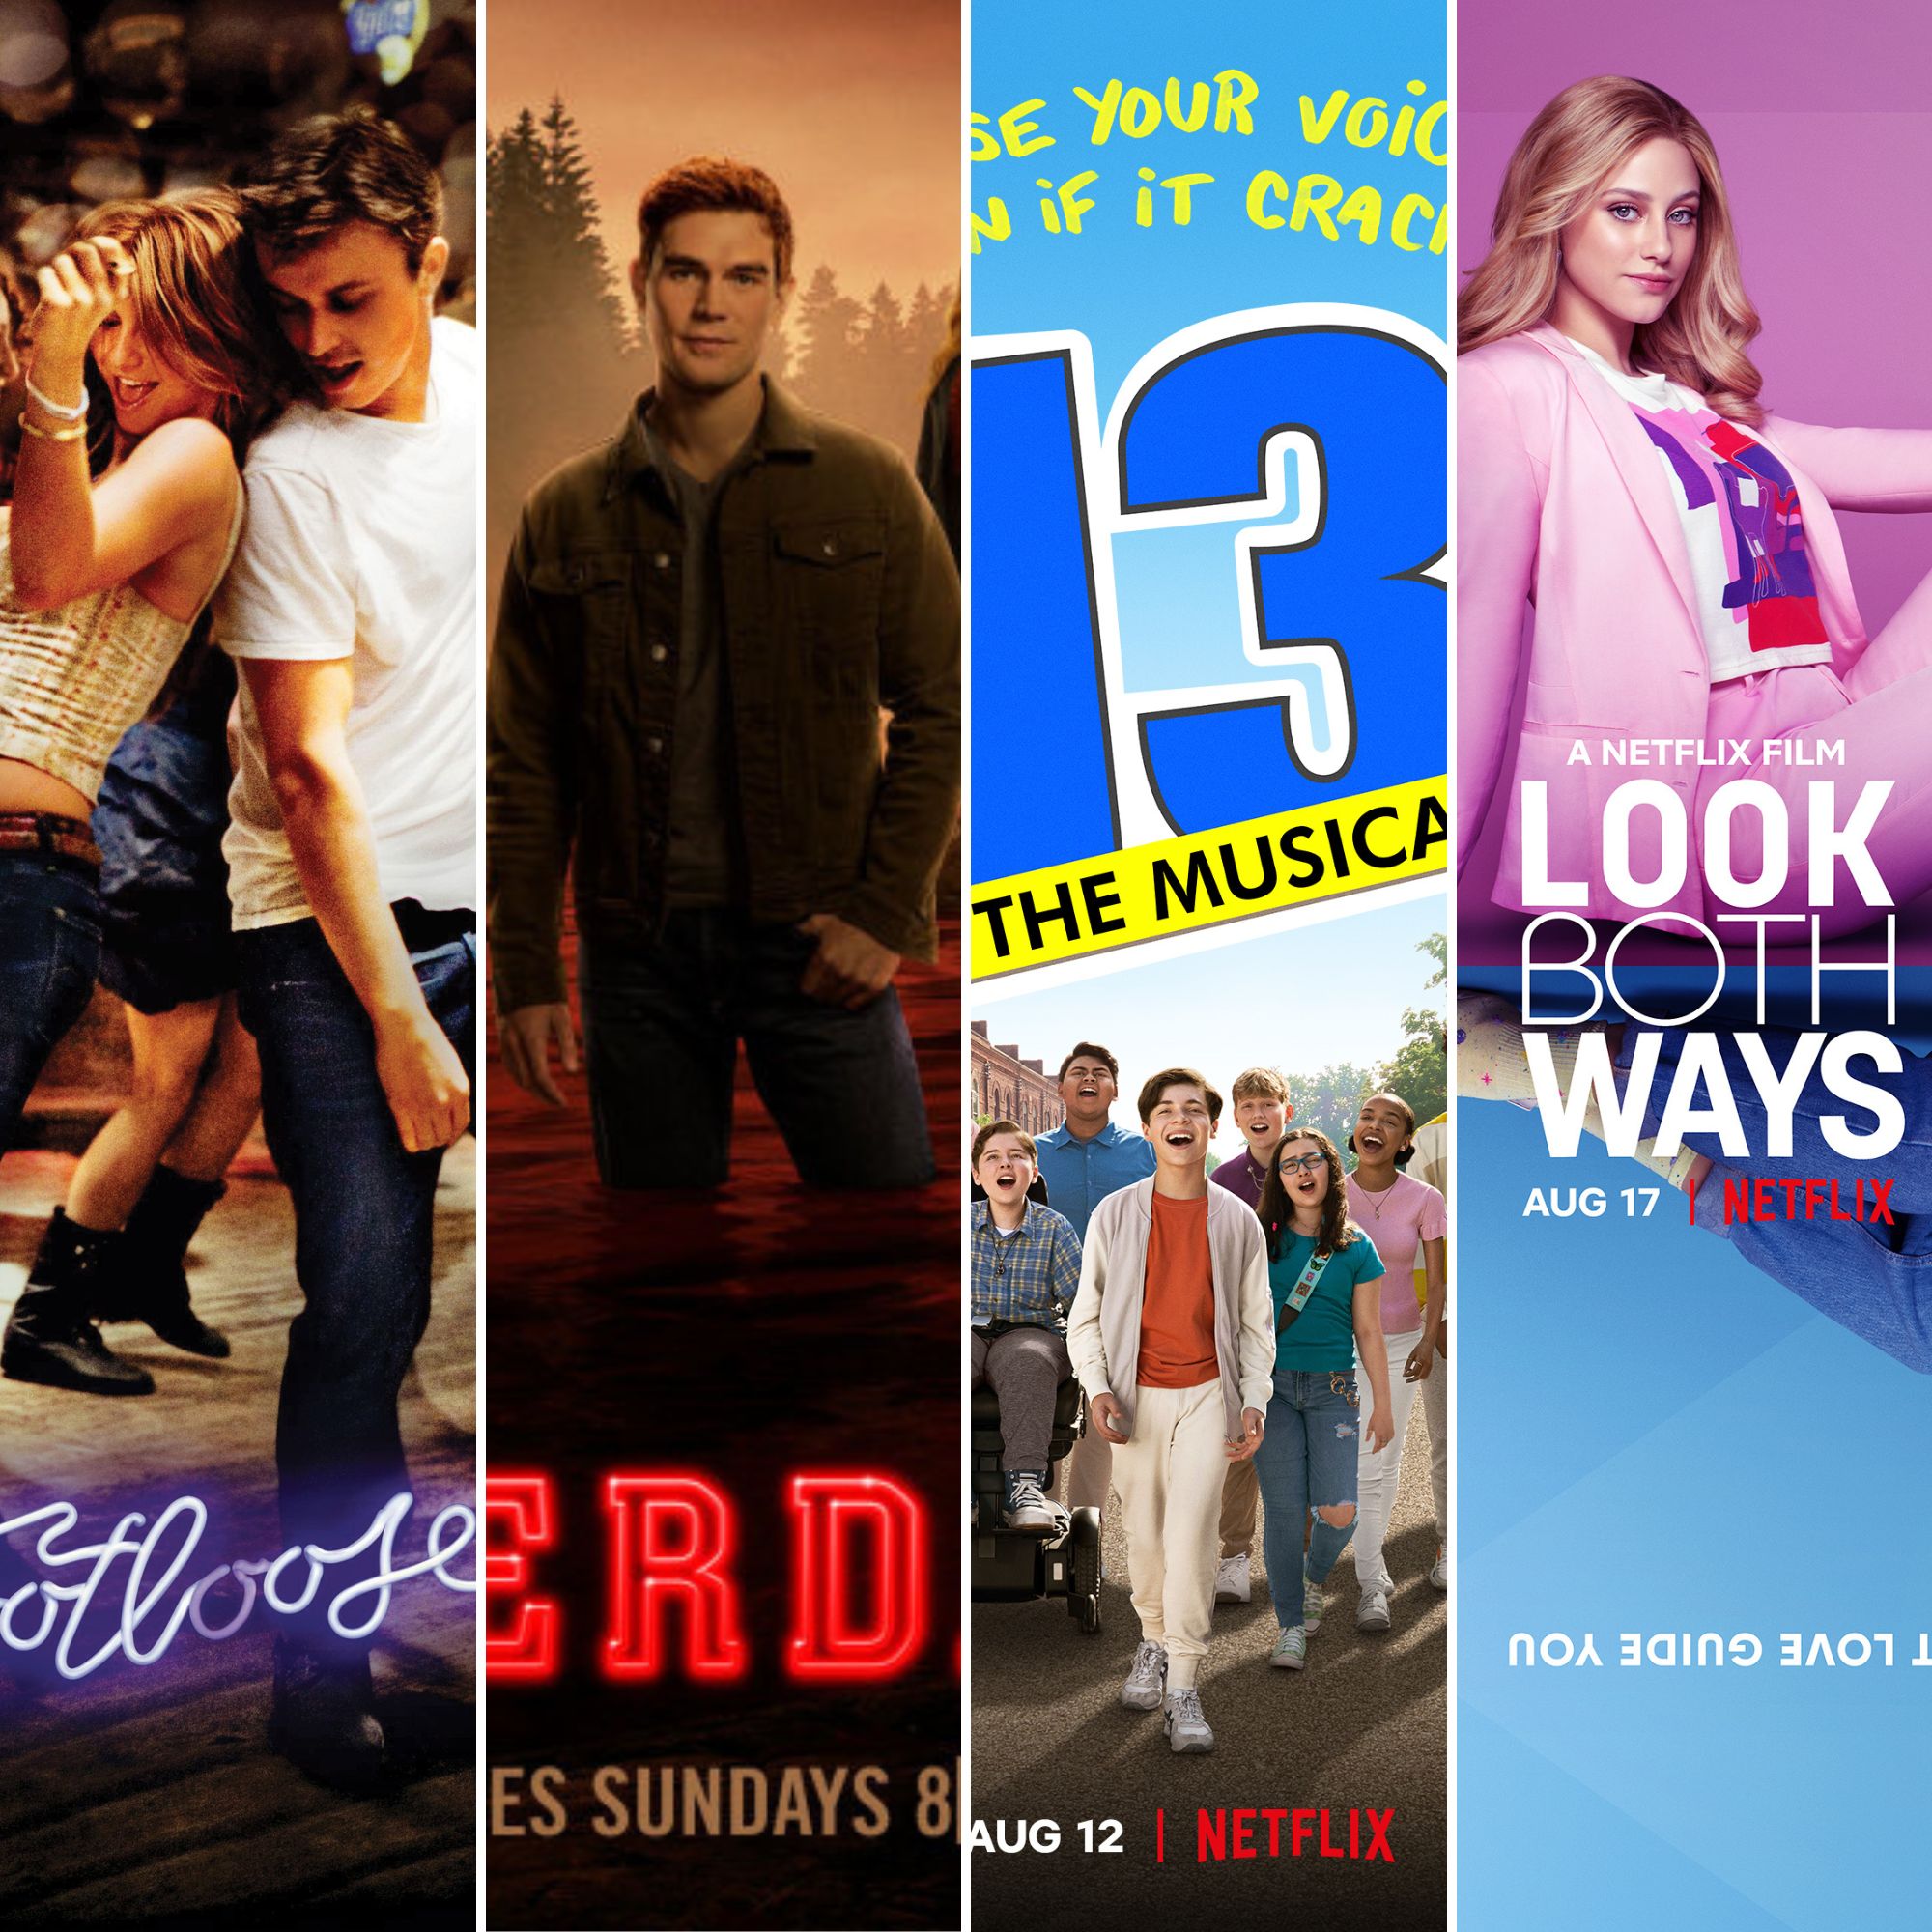 Netflix August 2022 Streaming Slate: List of Movies, TV Shows